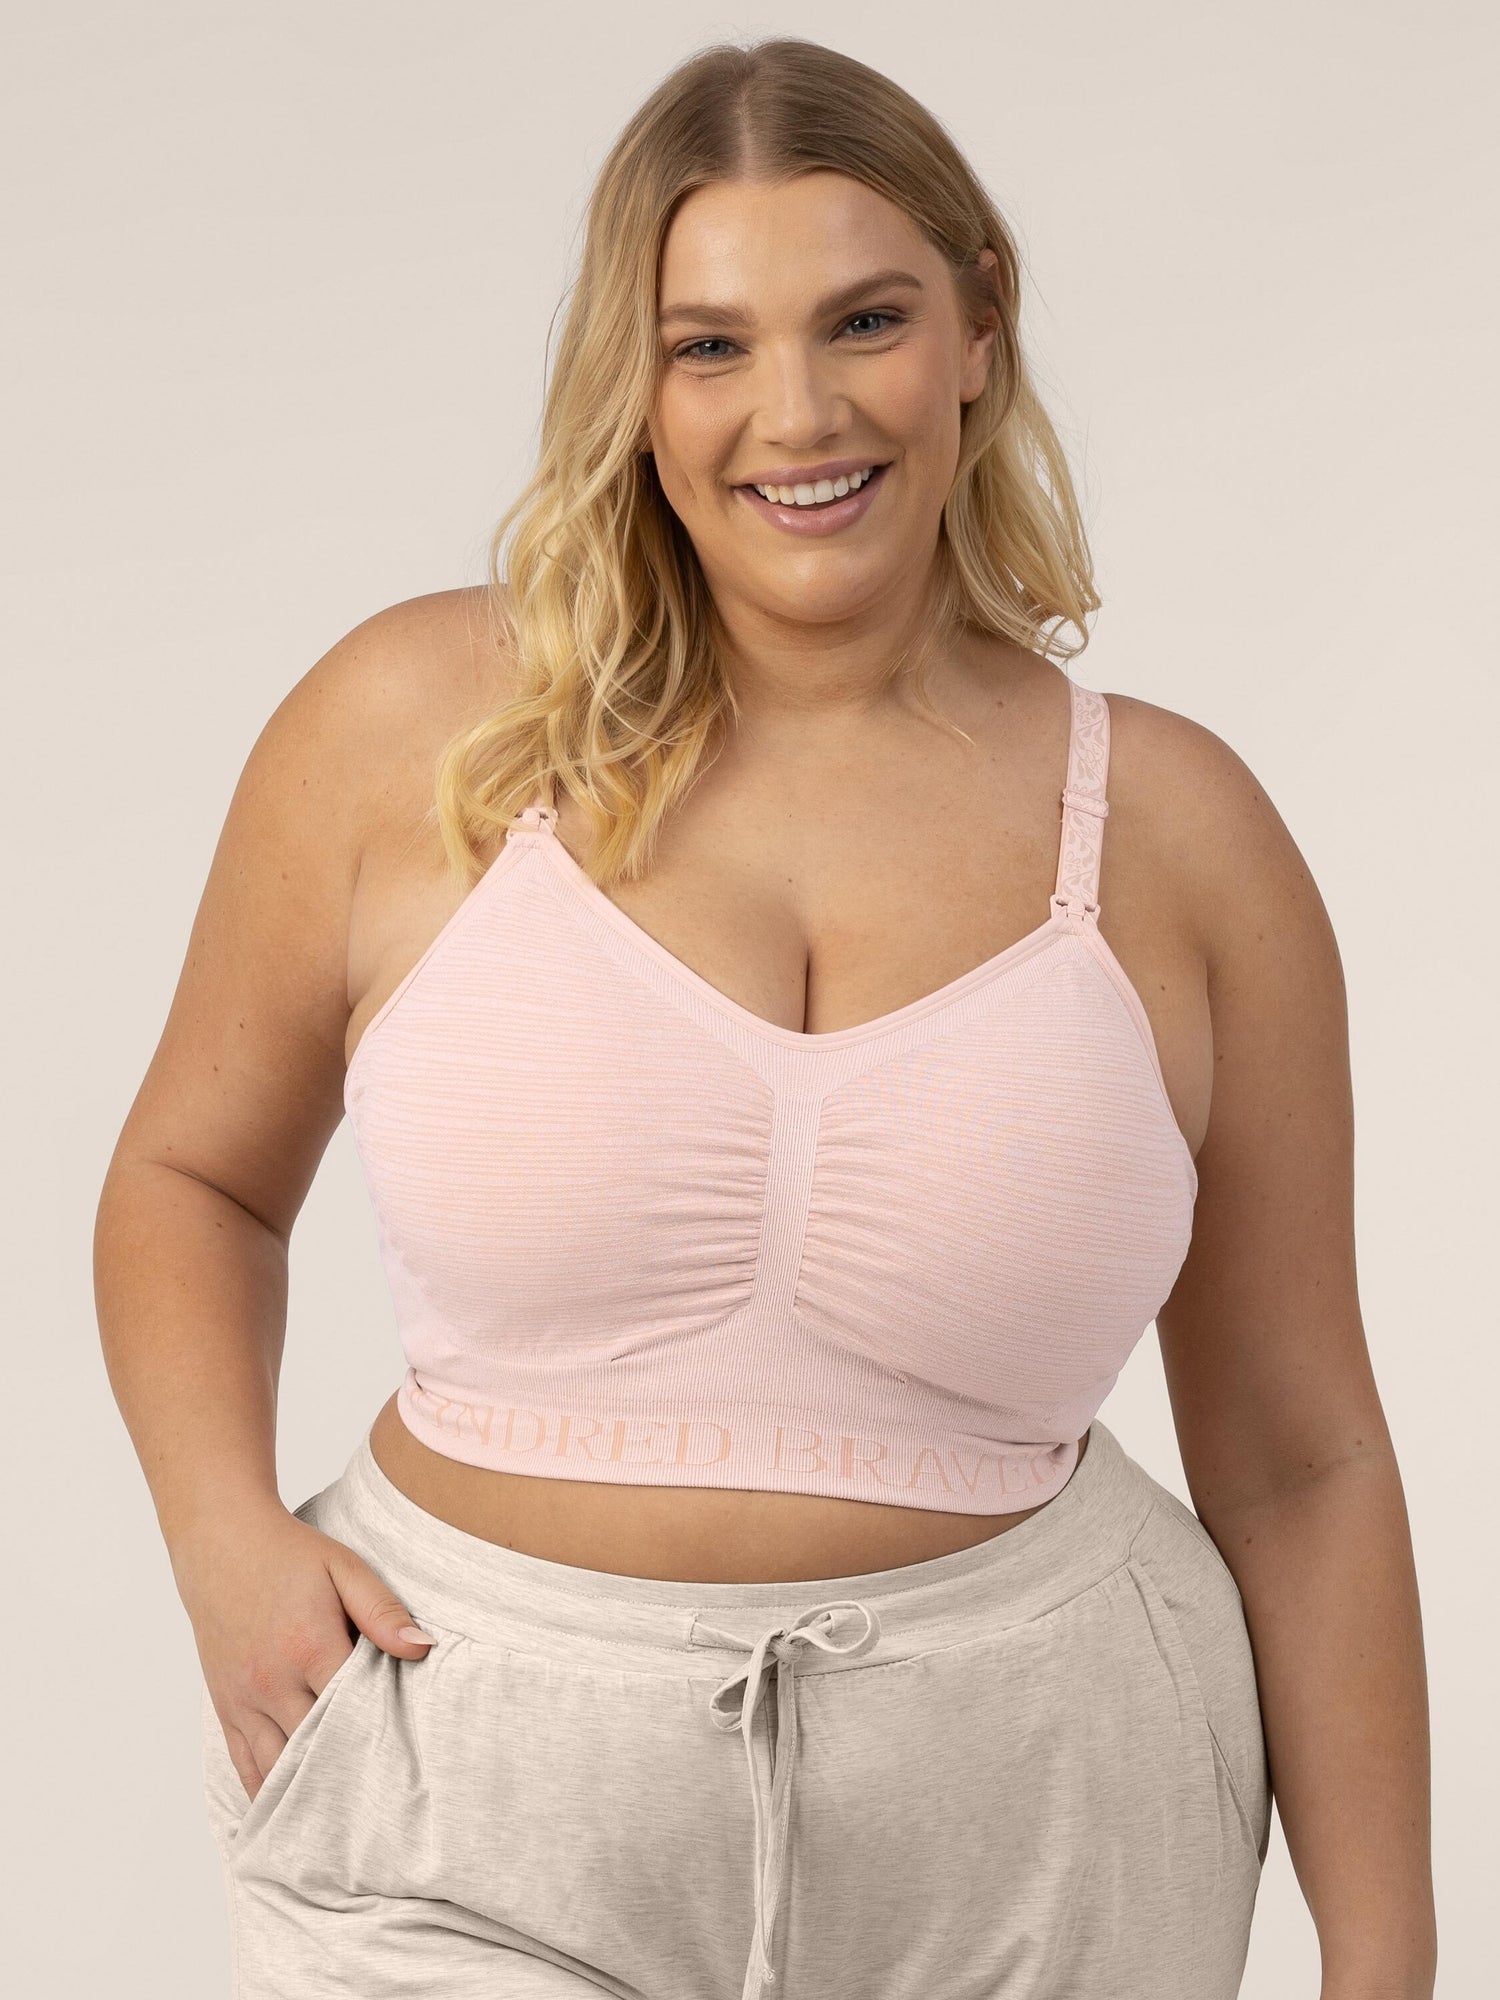 NEW Lansinoh Simple Wishes Hands Free Pumping Bra - Neutral Pink